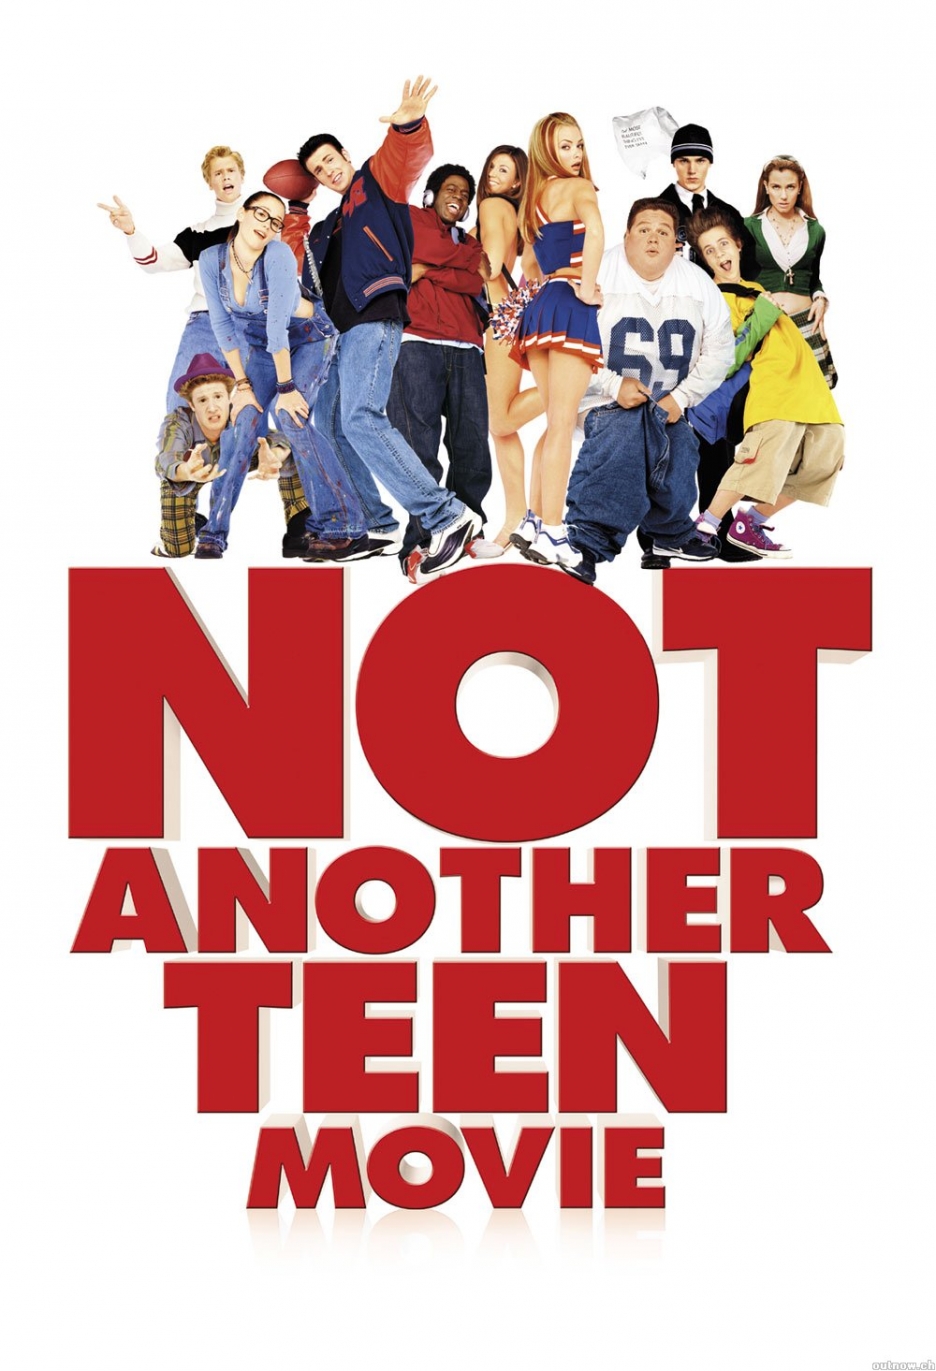 Not Just Another Teenage Movie